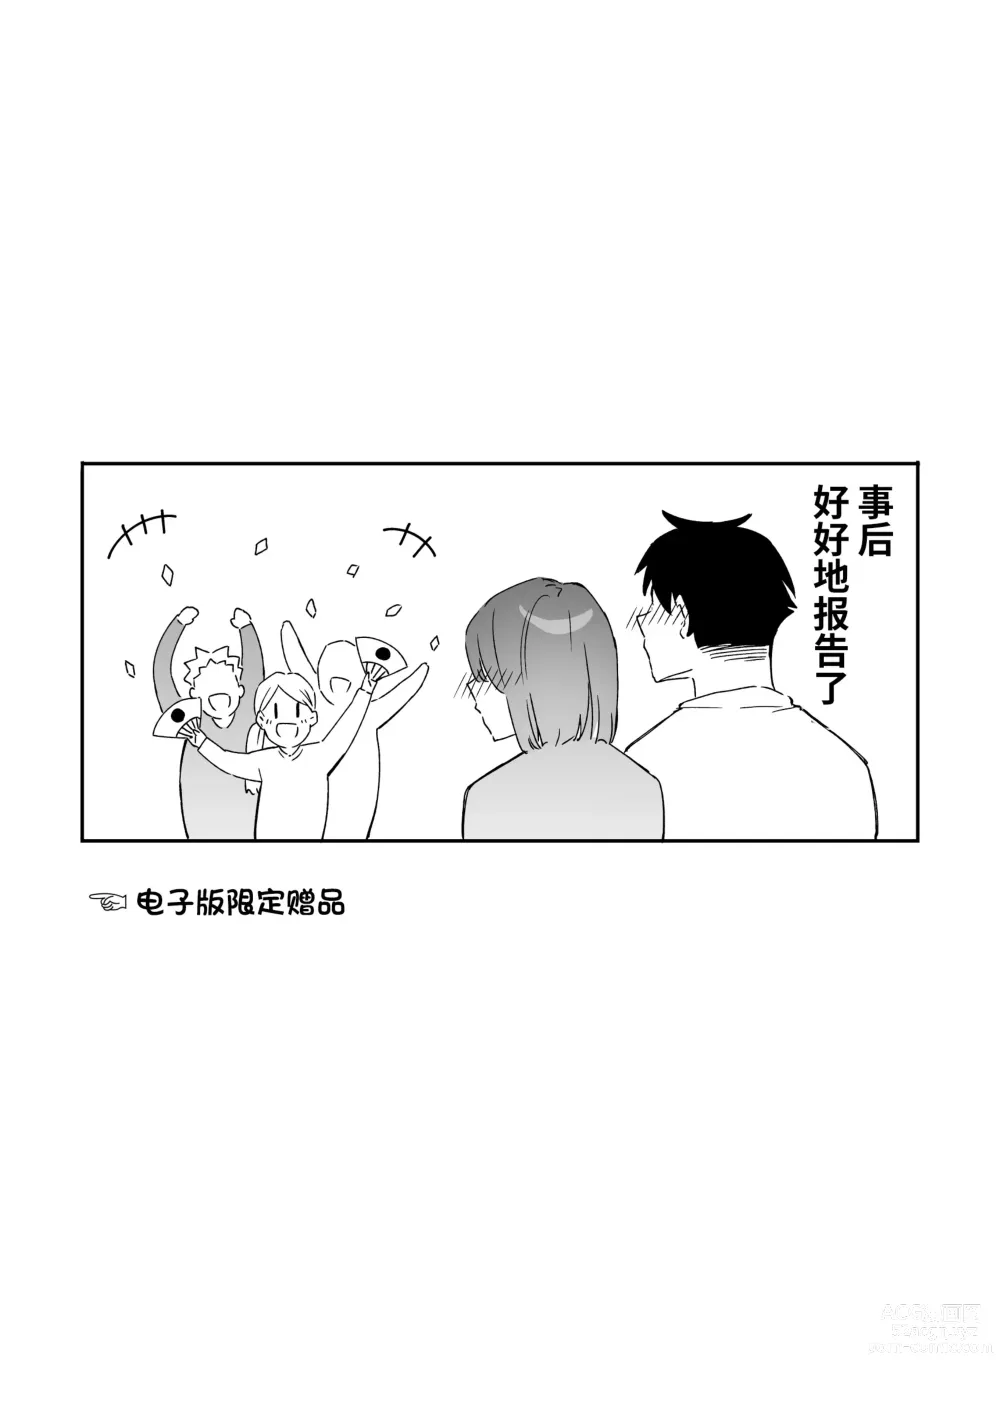 Page 37 of doujinshi 她的发情开关 2